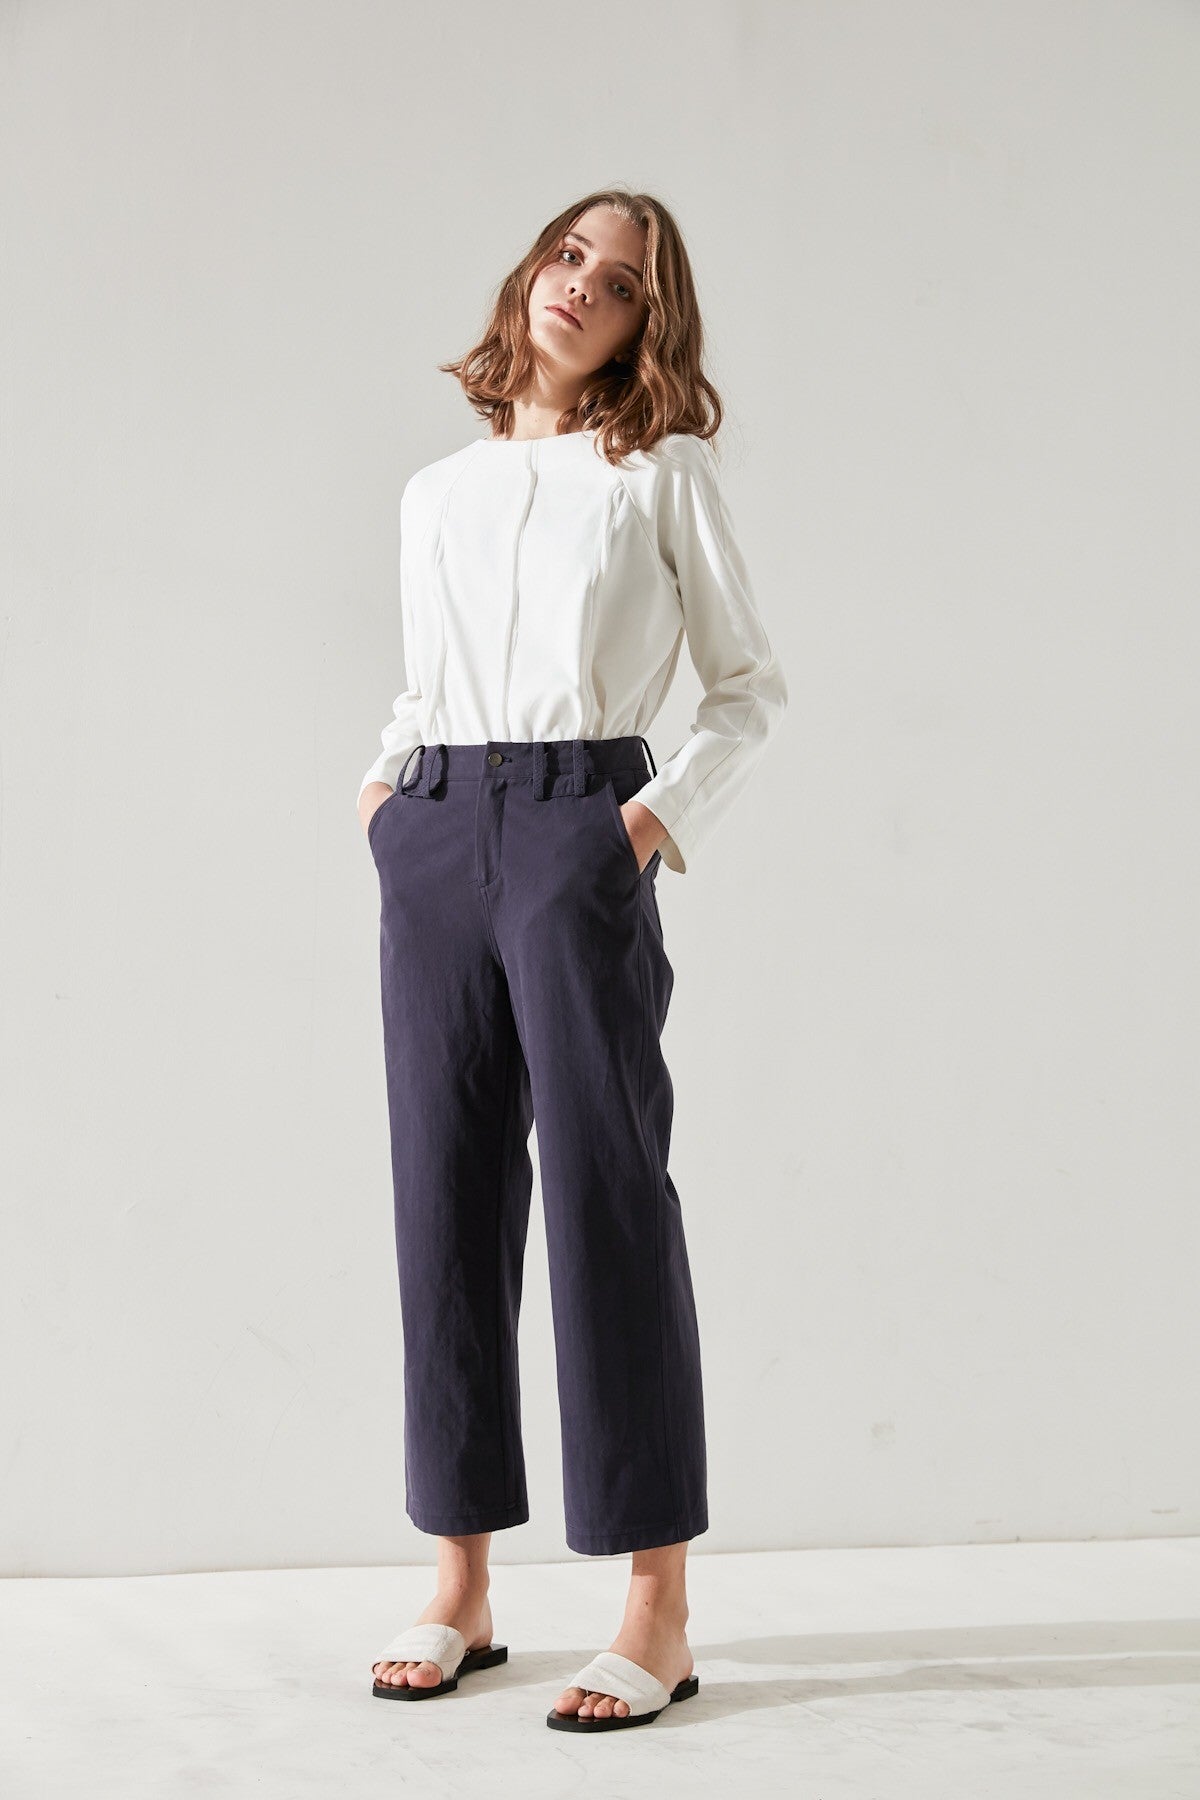 SKYE San Francisco SF California shop ethical sustainable modern minimalist quality women clothing fashion Fayette Cropped Pants 3